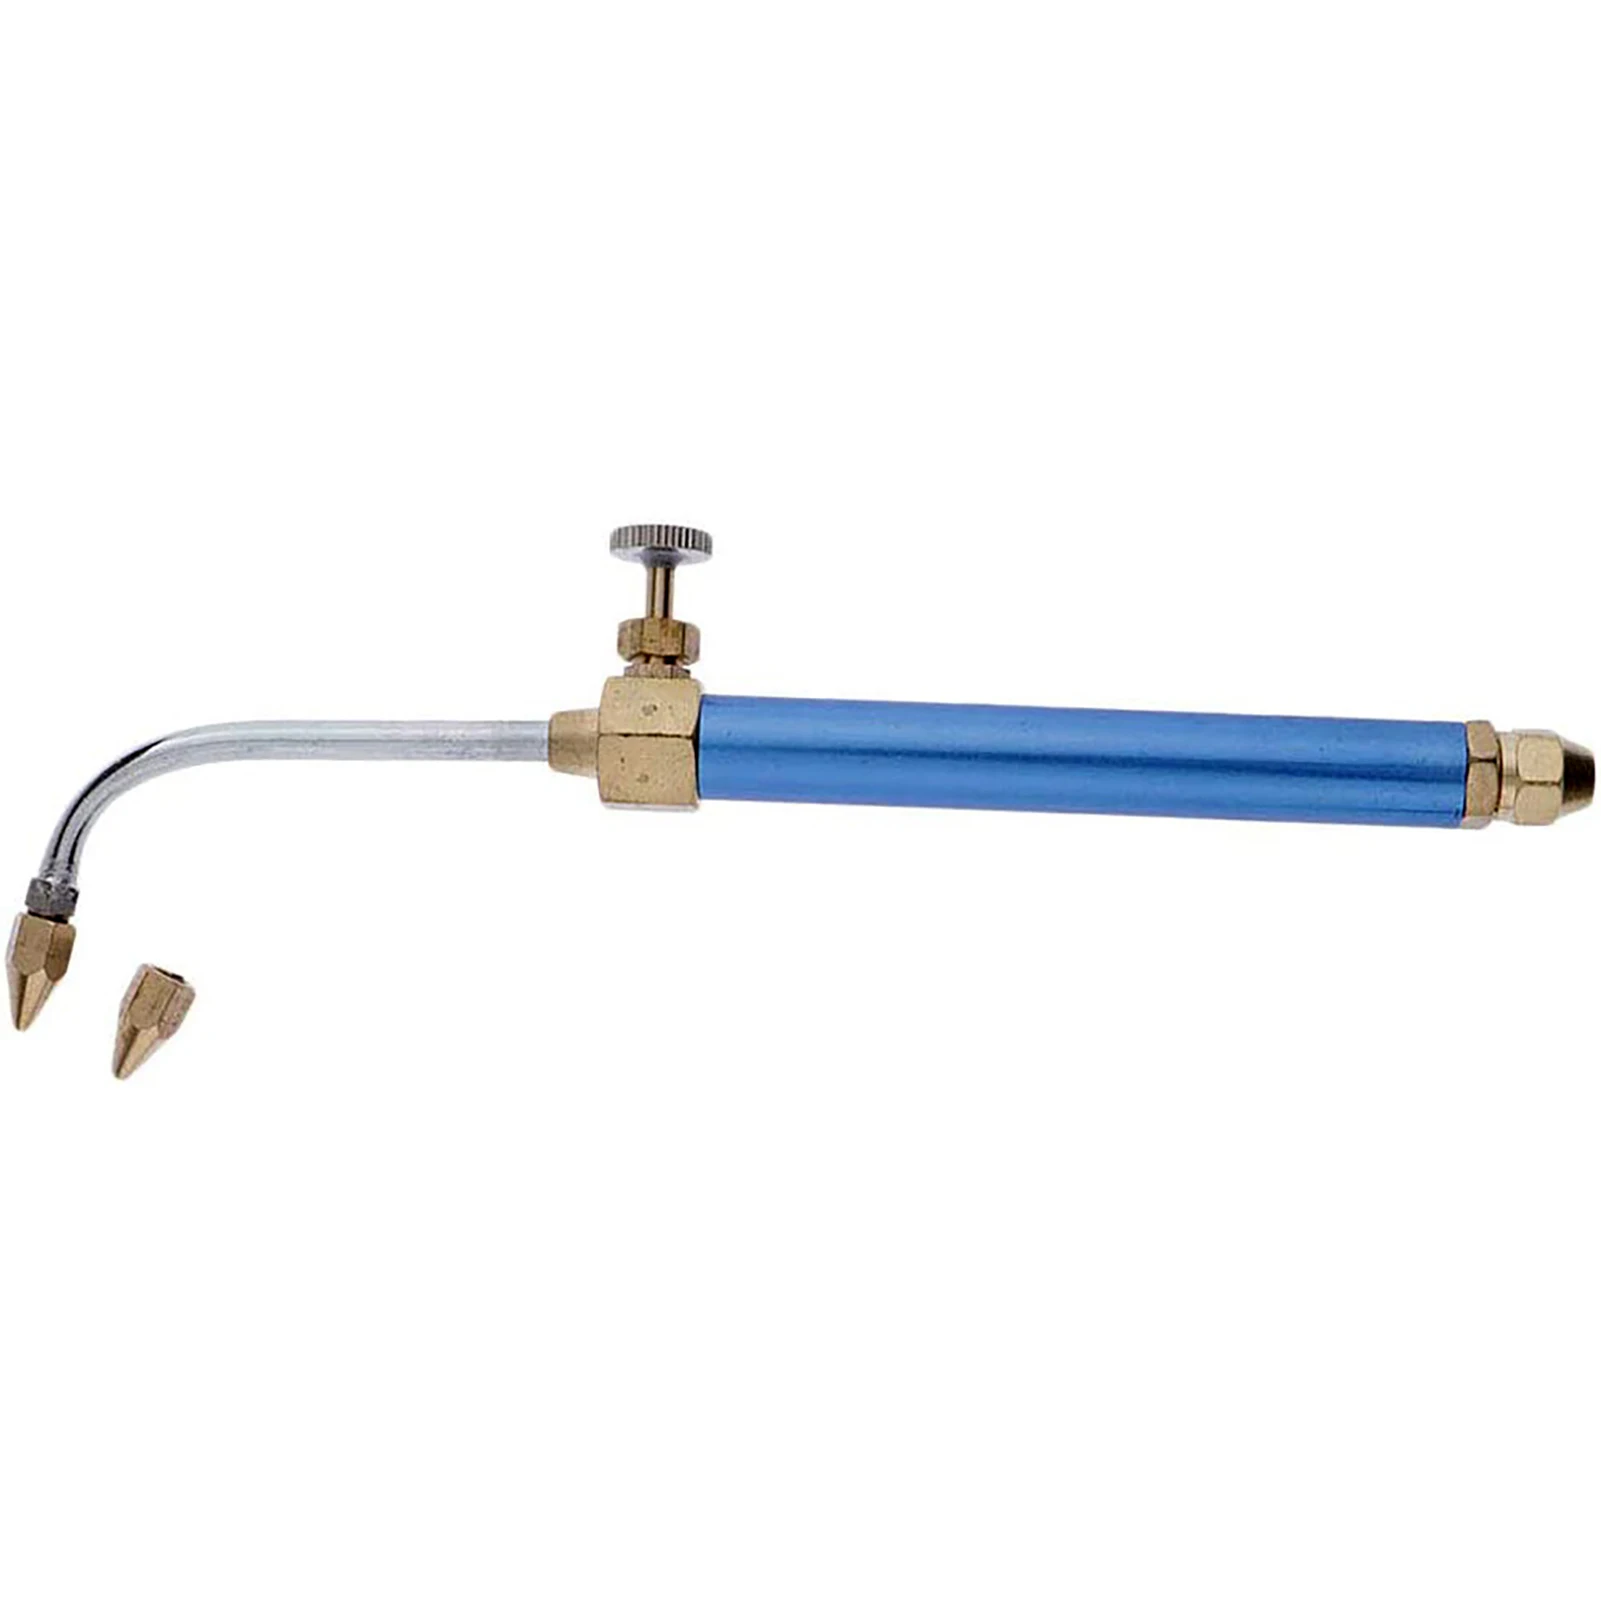 

Water Oxygen Brazing Soldering Gun Sturdy Material Water Hydrogen Torch Gun for Cable Repairing Hardening